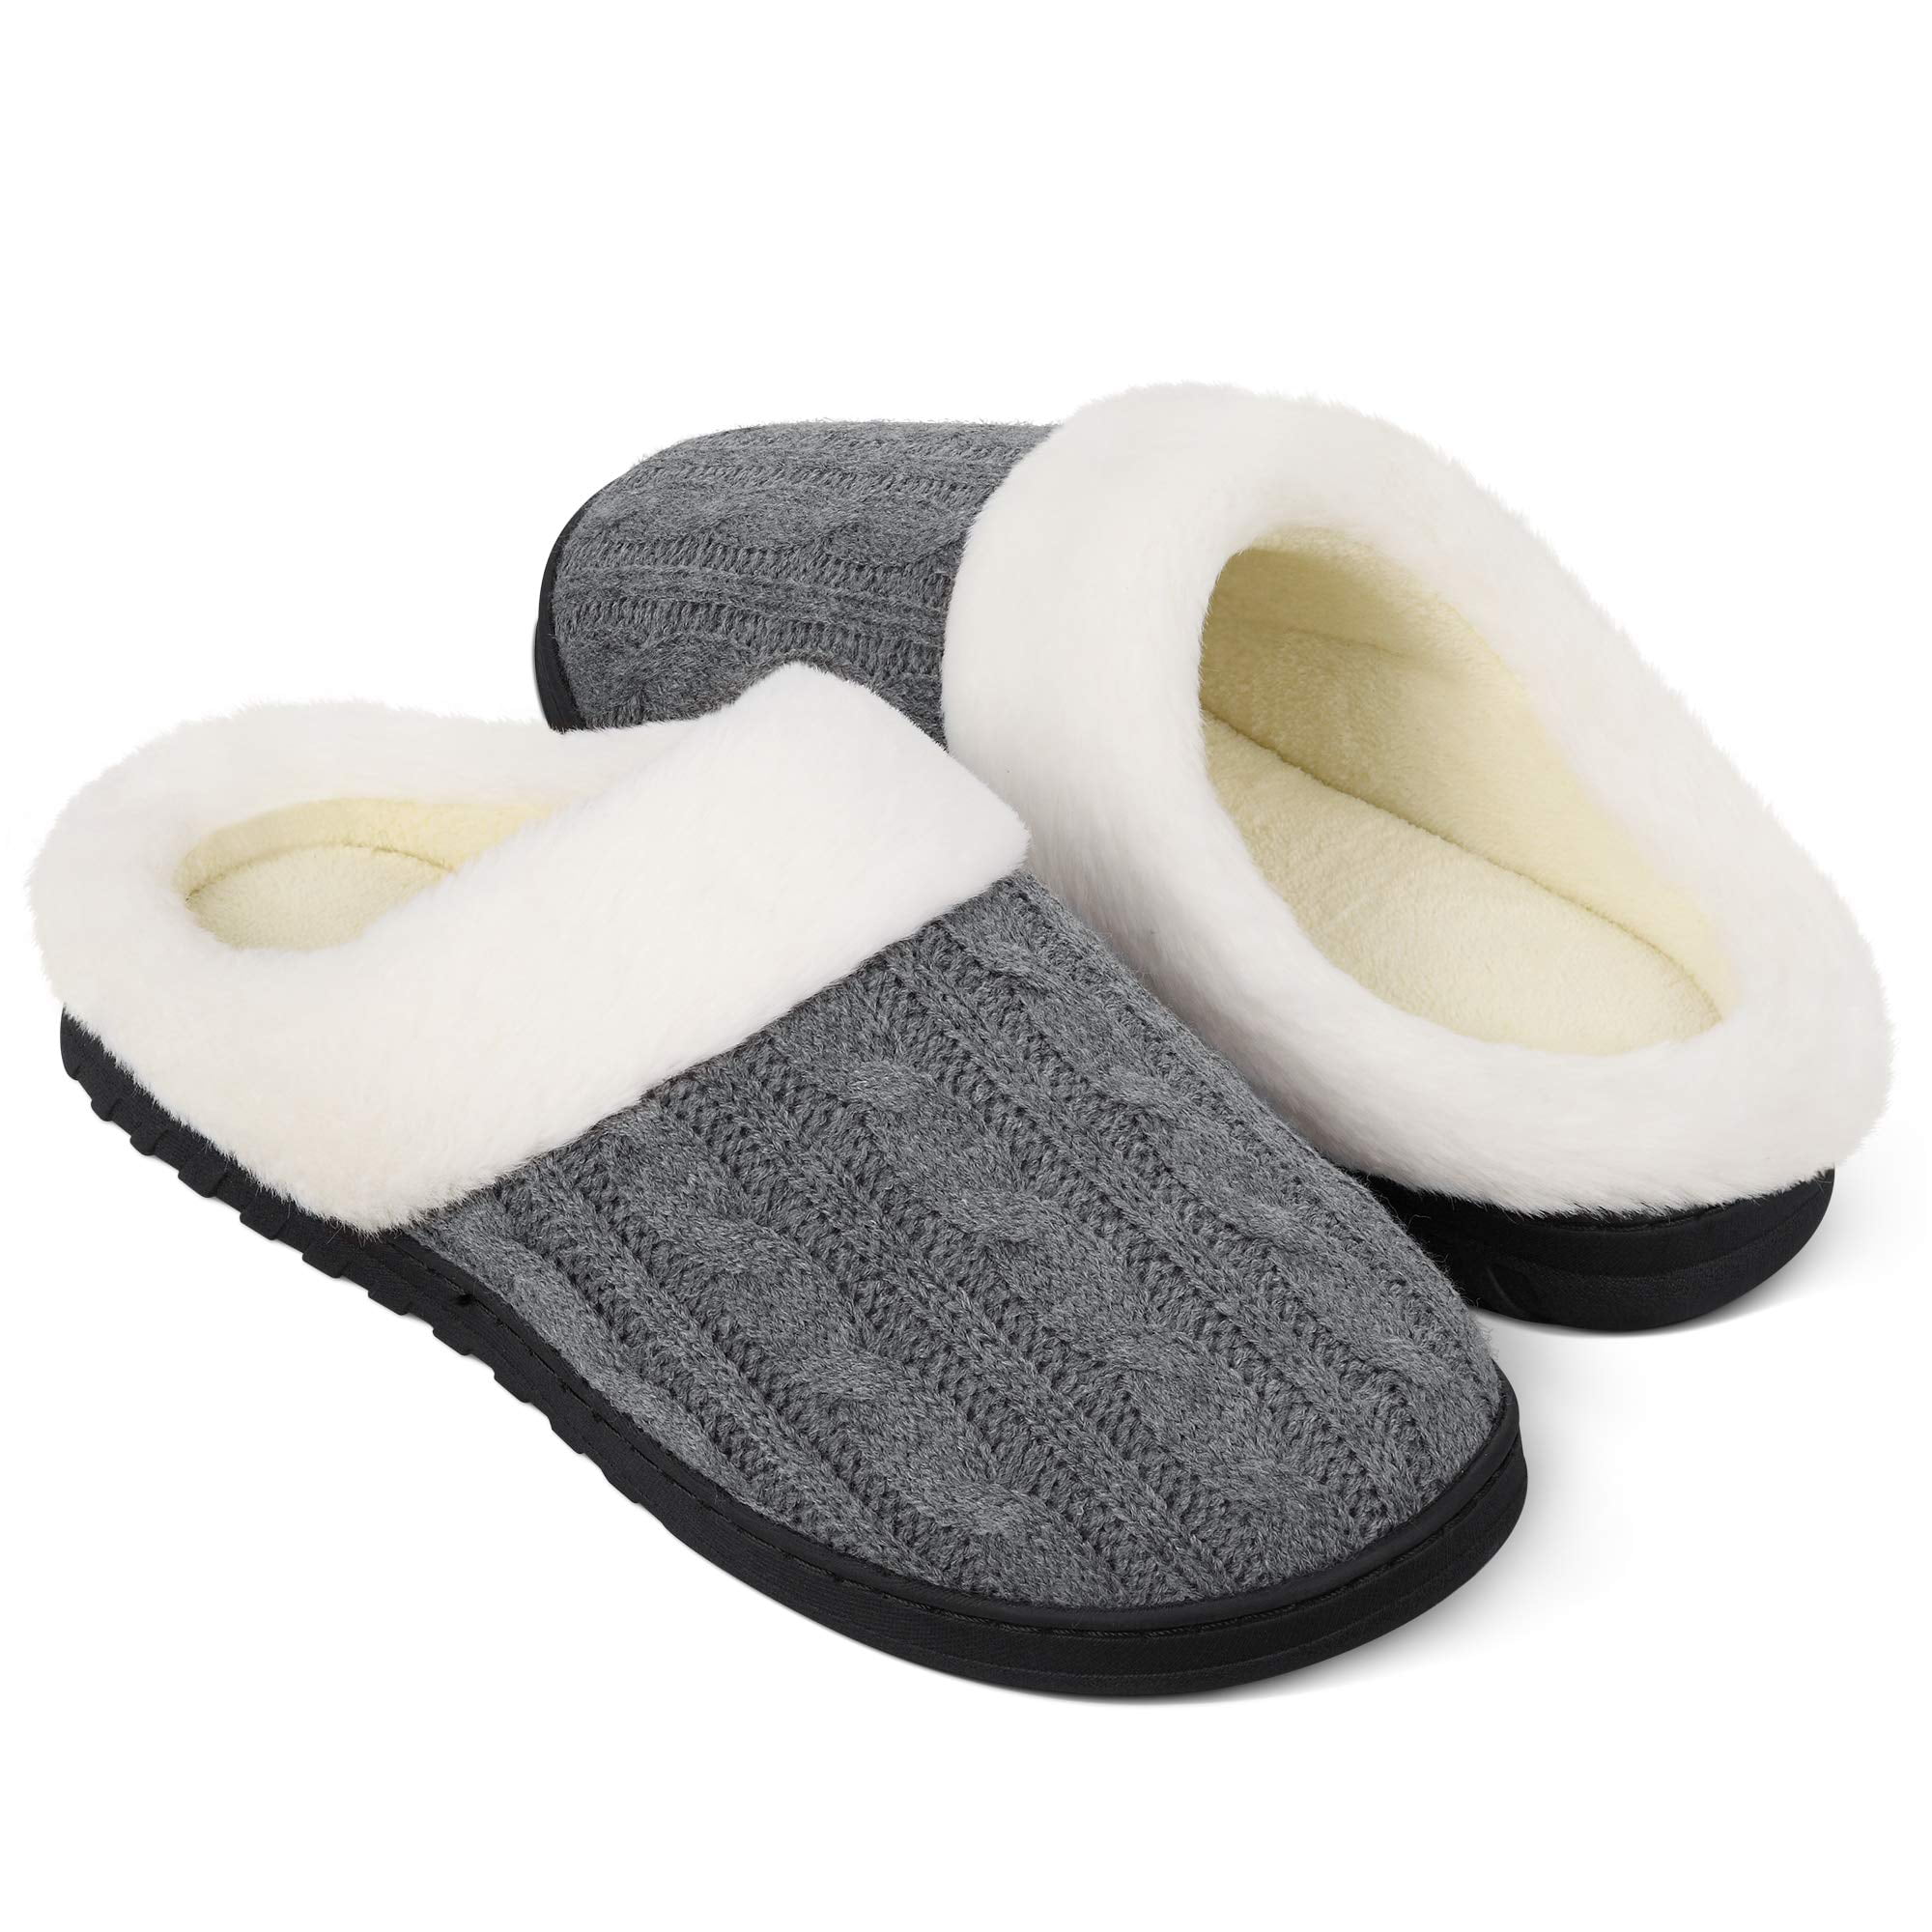 Women's Cable Knit Clog Slippers Fur Lined Cuff Memory Foam House Indoor Shoes 